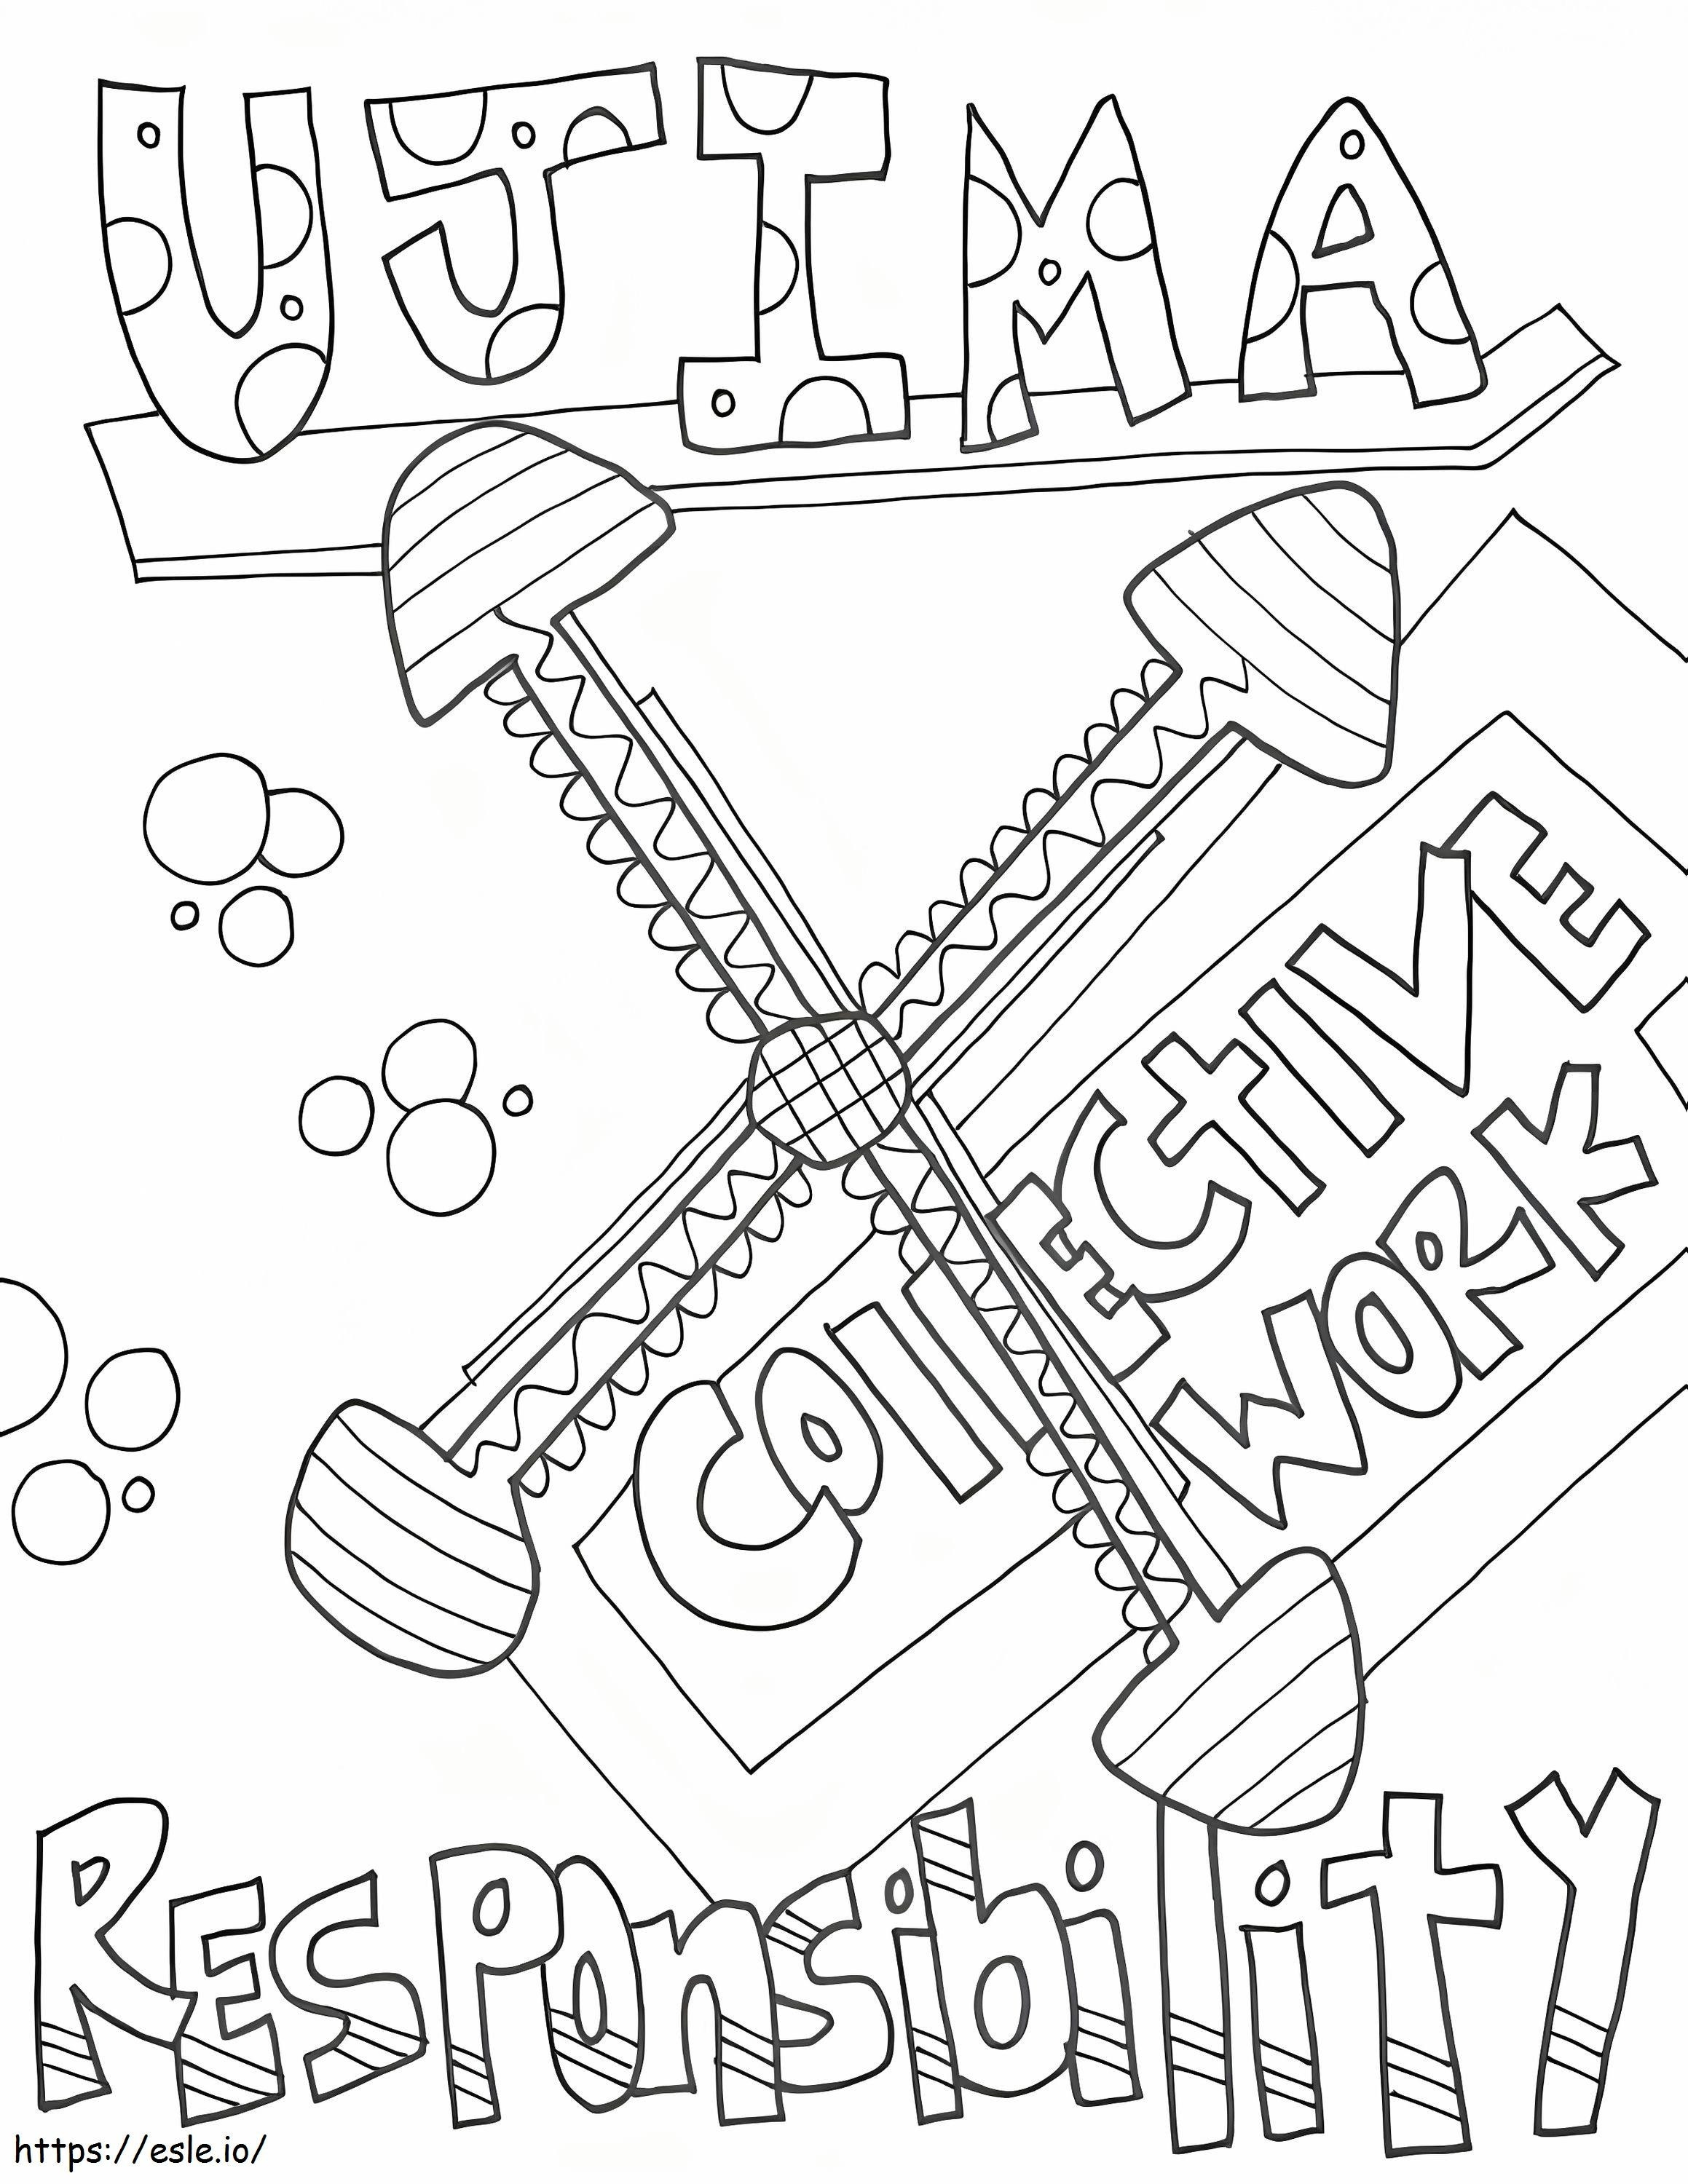 Responsibility Doodle coloring page